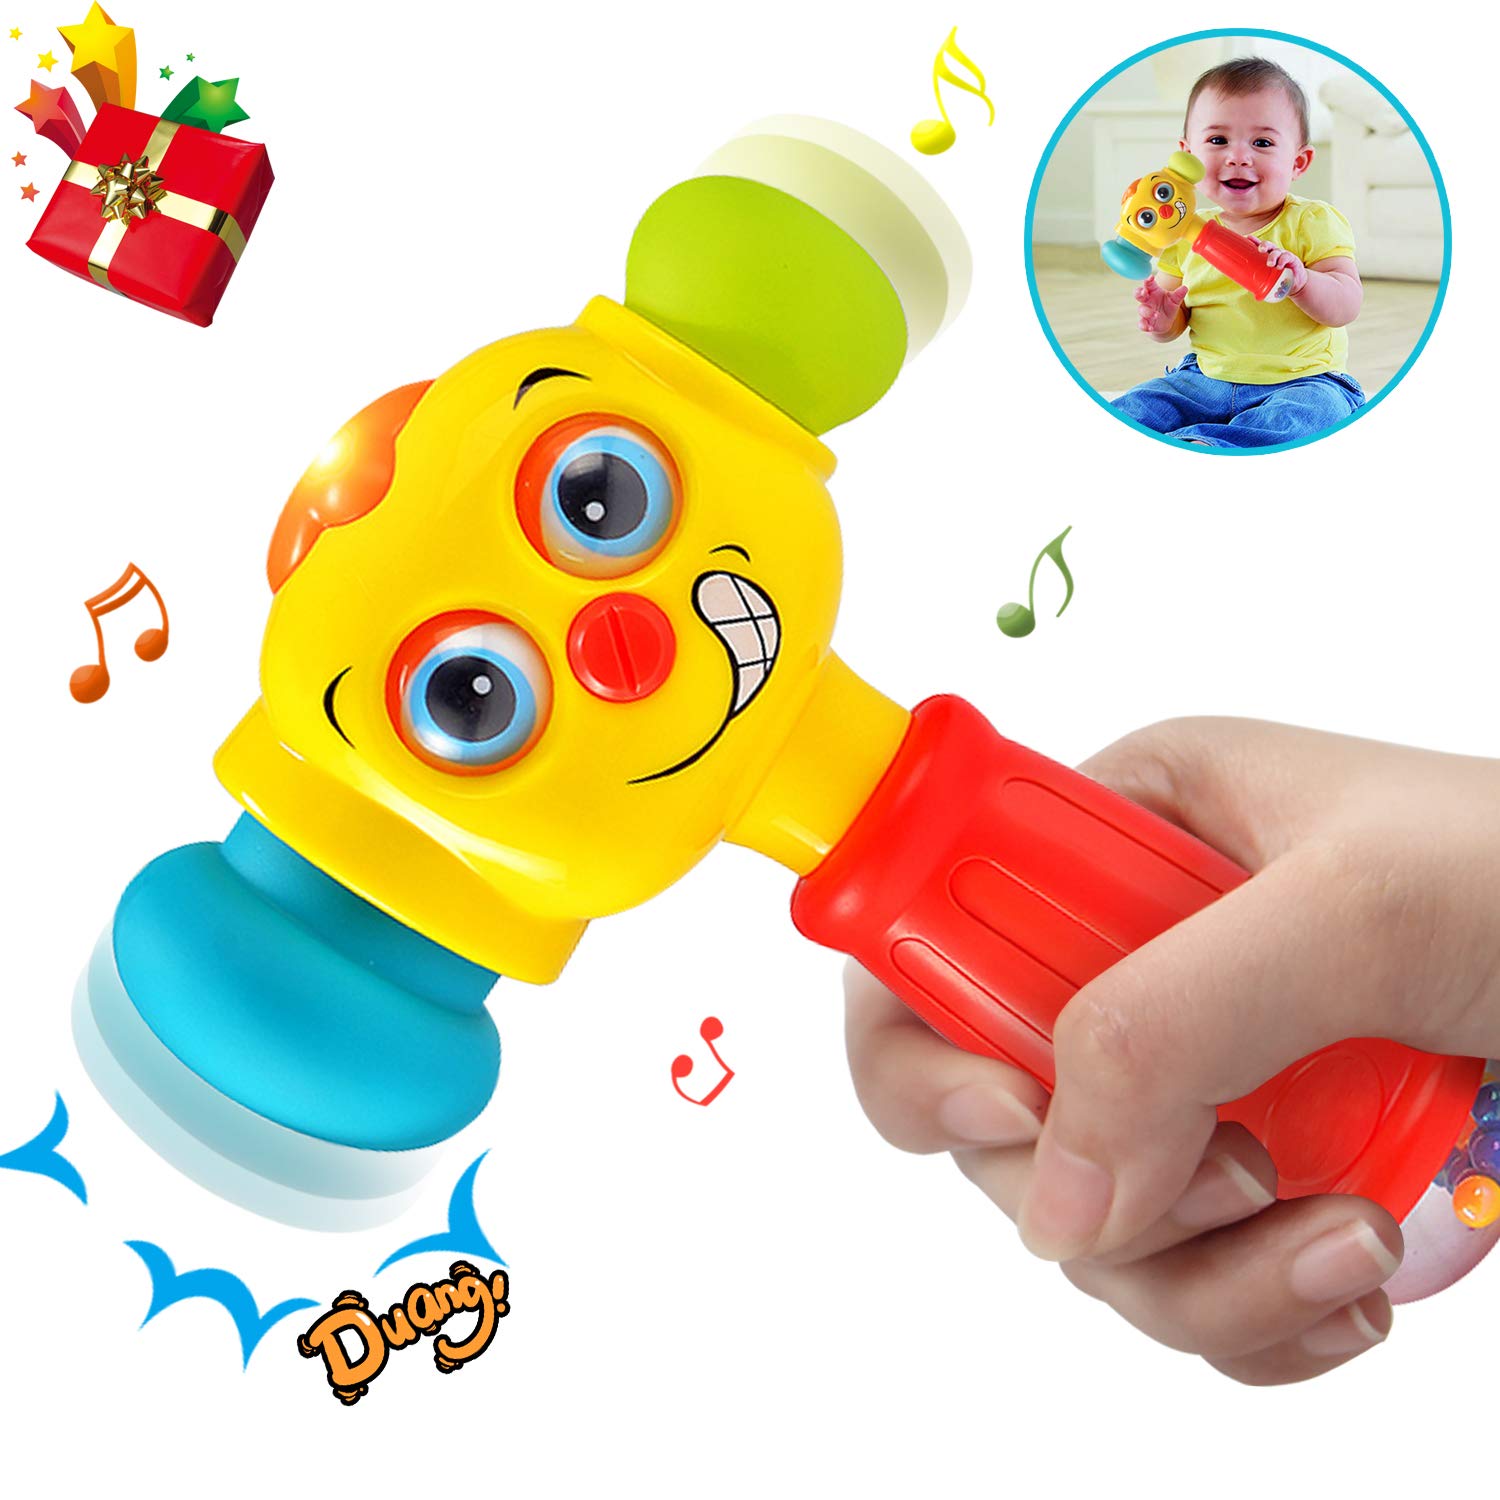 HOMOFY Baby Toys Funny Changeable Hammer Toys 6 Months up,Multi-Function,Lights MusicToys for Infant Boys Girls 1 2 3 Years Old -Best Gifts